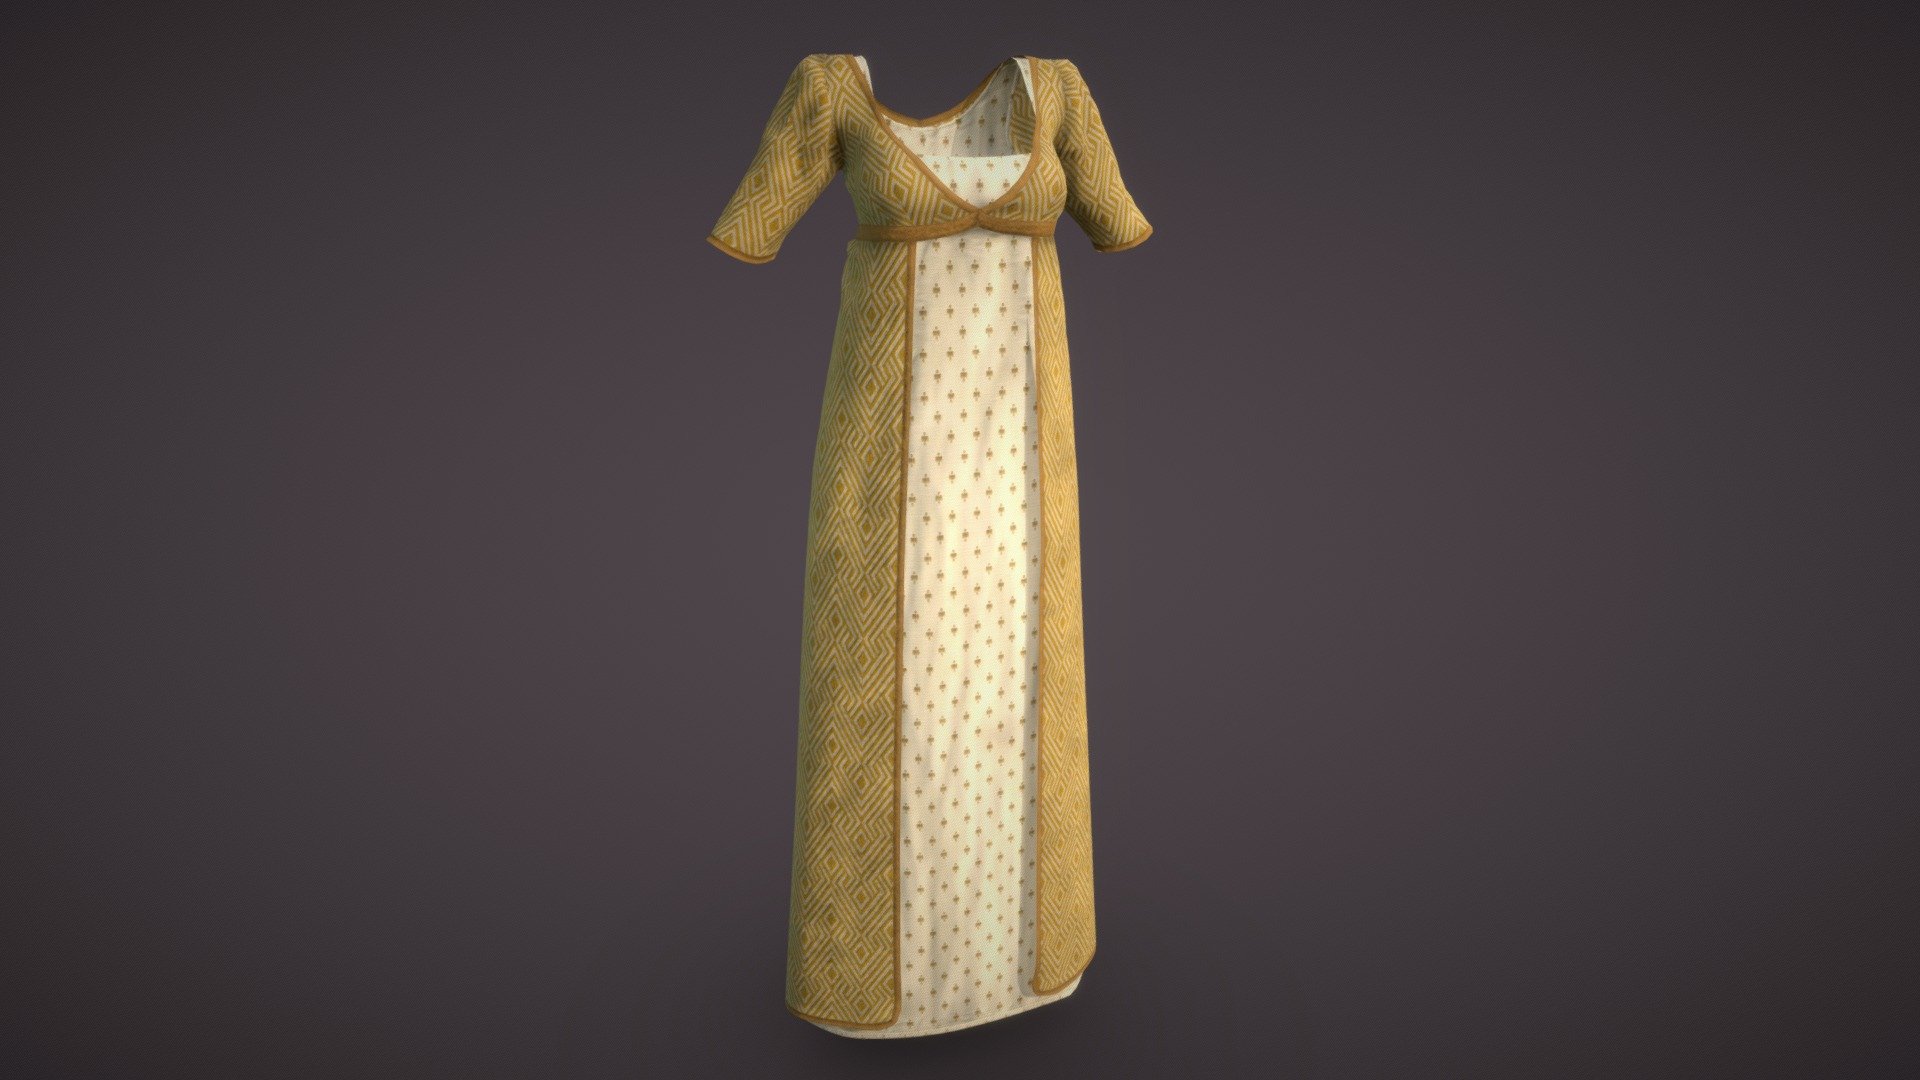 Detailed model of a dress with a yellow cape-coat in the Empire style
Vibrant yellow geometric cape-coat will not go unnoticed. The dress will perfectly fit into a fashion presentation, historical work, or become a beautiful addition to your avatar wardrobe. And add the realism and beauty of the Empire style to your project, game or metaverse:)

If you want more dresses - look at my models ^.^




Model info



created in Marvelous Designer

triangle topology, 25k triangles, no retop

clean unwrapped UV

textured in Substance Painter

2 sets of texture maps: Diffuse, Roughness, Metalness, Normal + MetallicSmoothness for Unity (all 4096*4096)

2 material

ready to use in blend and fbx format

attached MD file (zpac) to fit the dress to your character

The dress is made for a standard figure and fit to any character with a little effort.

Have questions about the model?
Mail me tochechkavhoda@gmail.com - Empire cape dress - Buy Royalty Free 3D model by tochechka 3d model